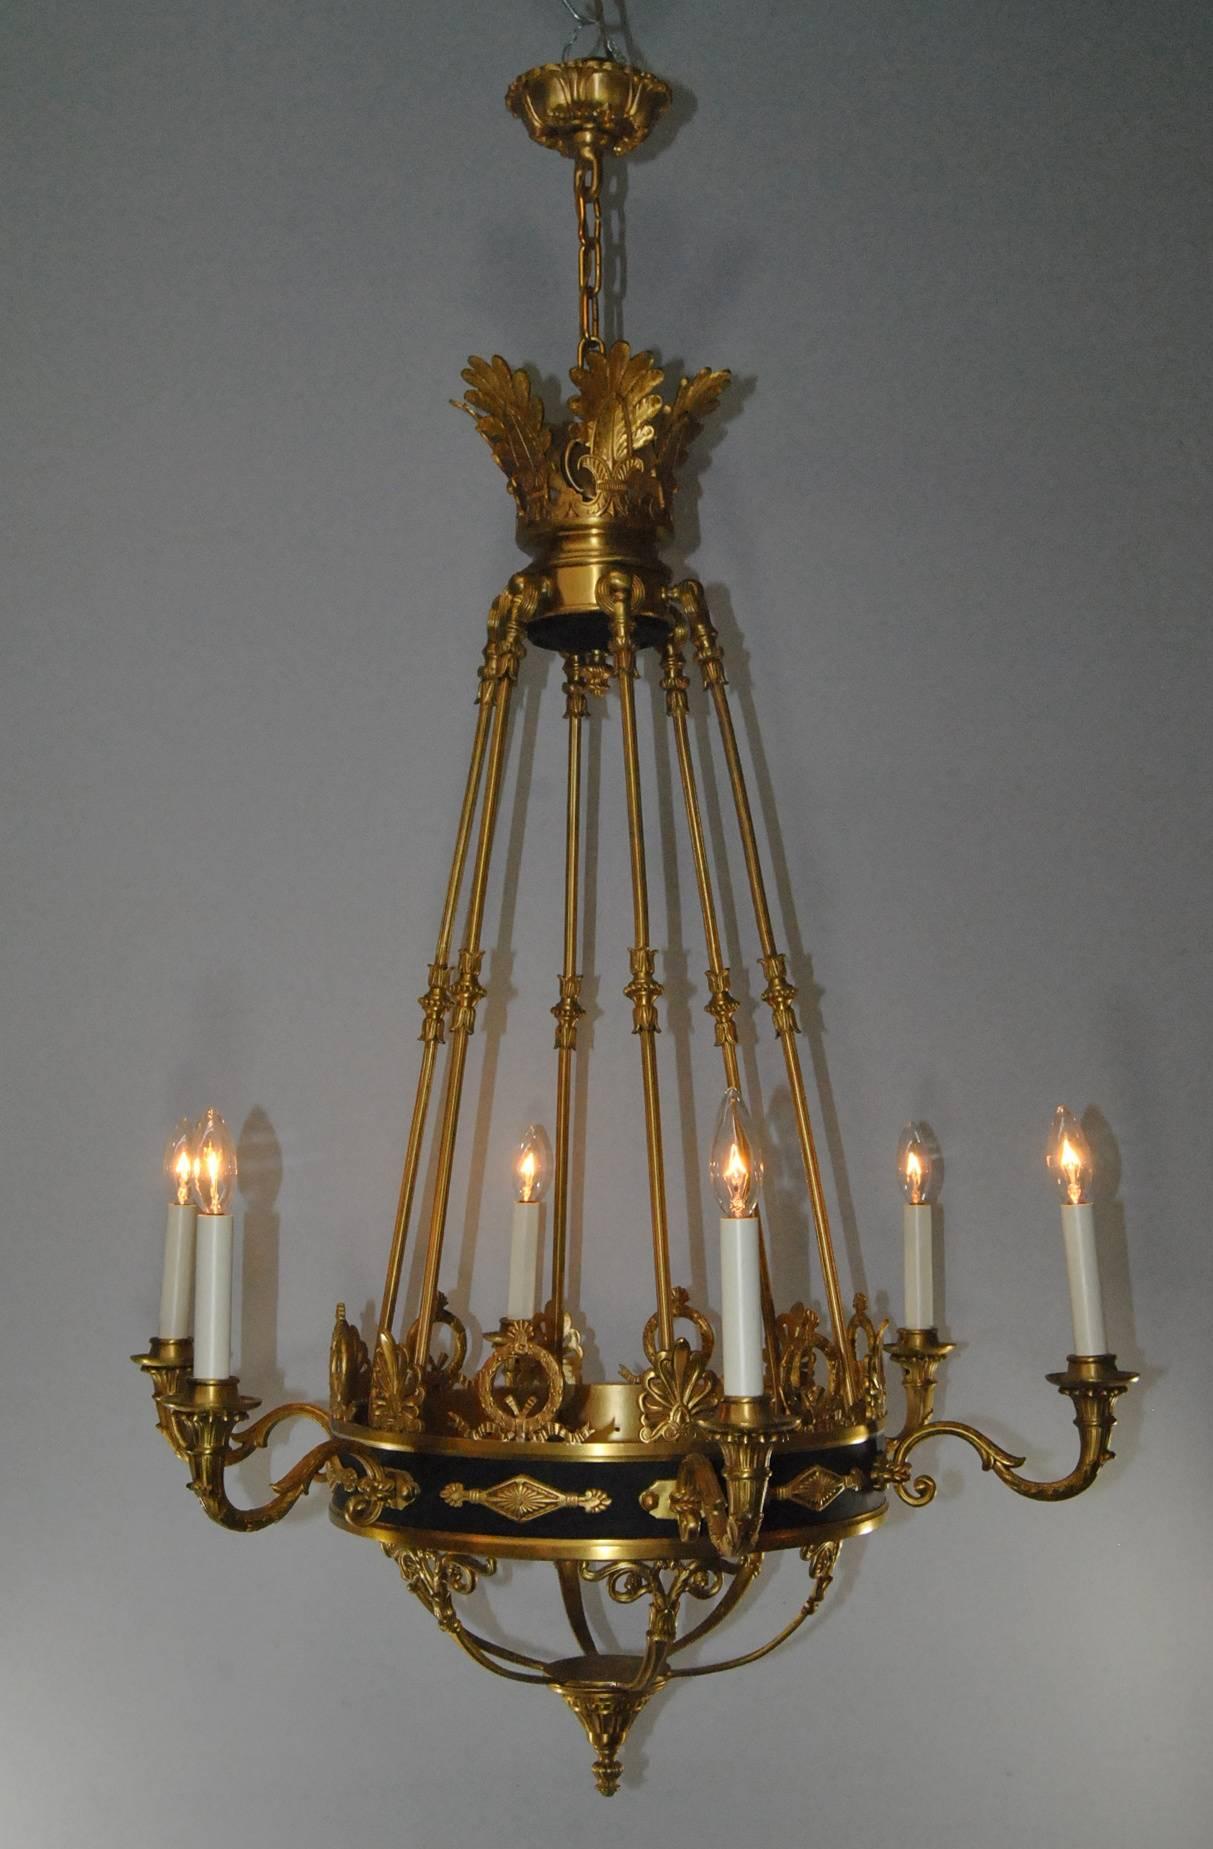 20th Century French Empire Style Six-Arm Chandelier in Gold Dore Bronze and Black Tole Accent